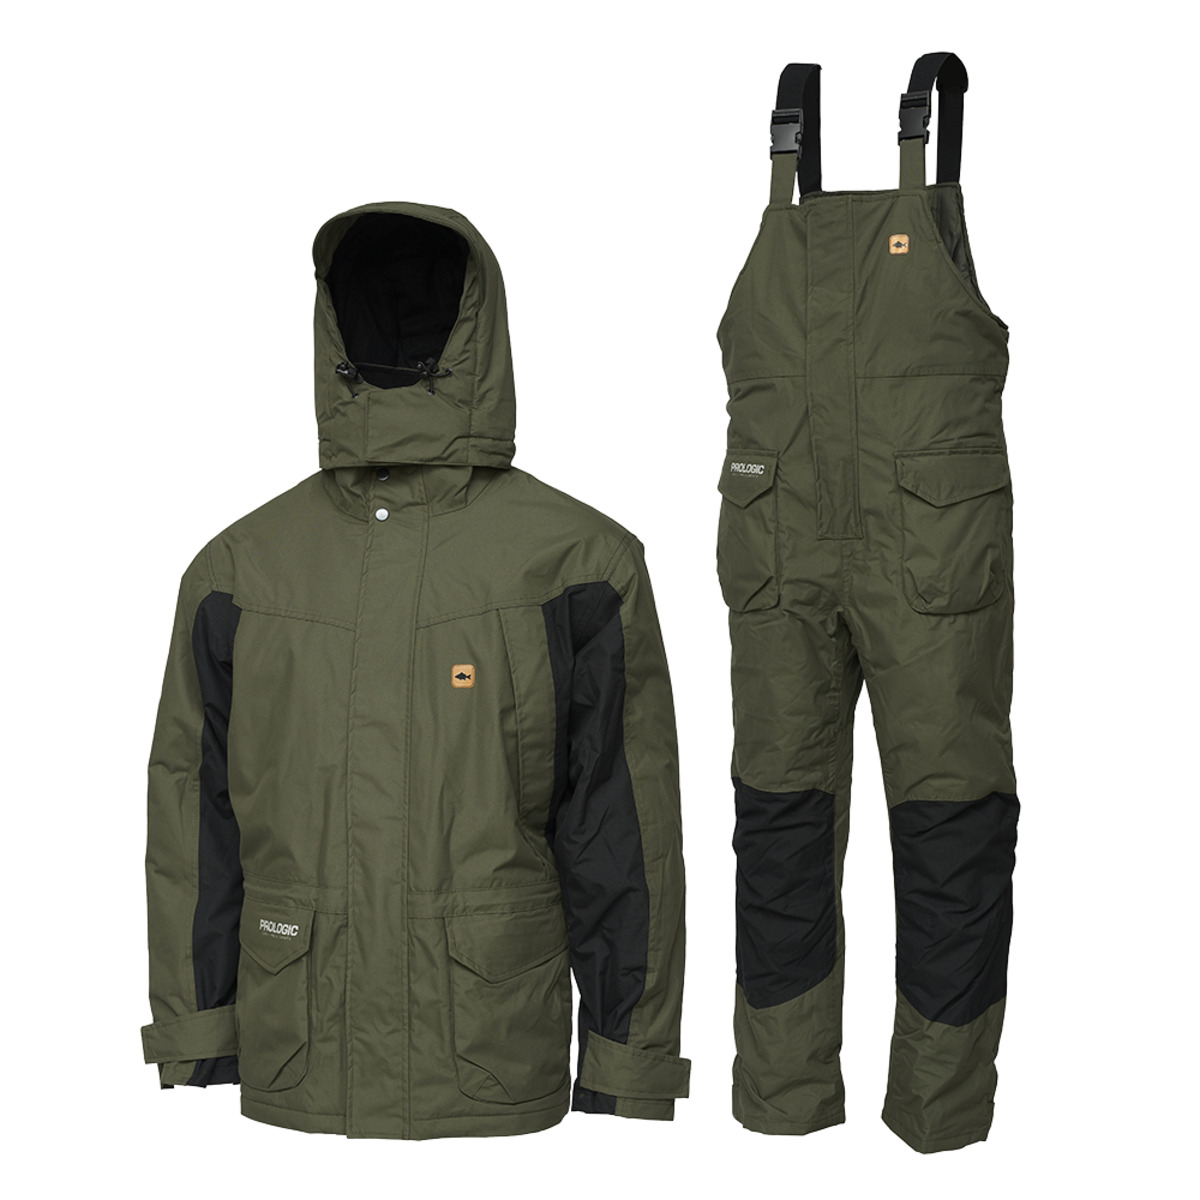 Prologic Highgrade Thermo Suit - M GREEN/BLACK